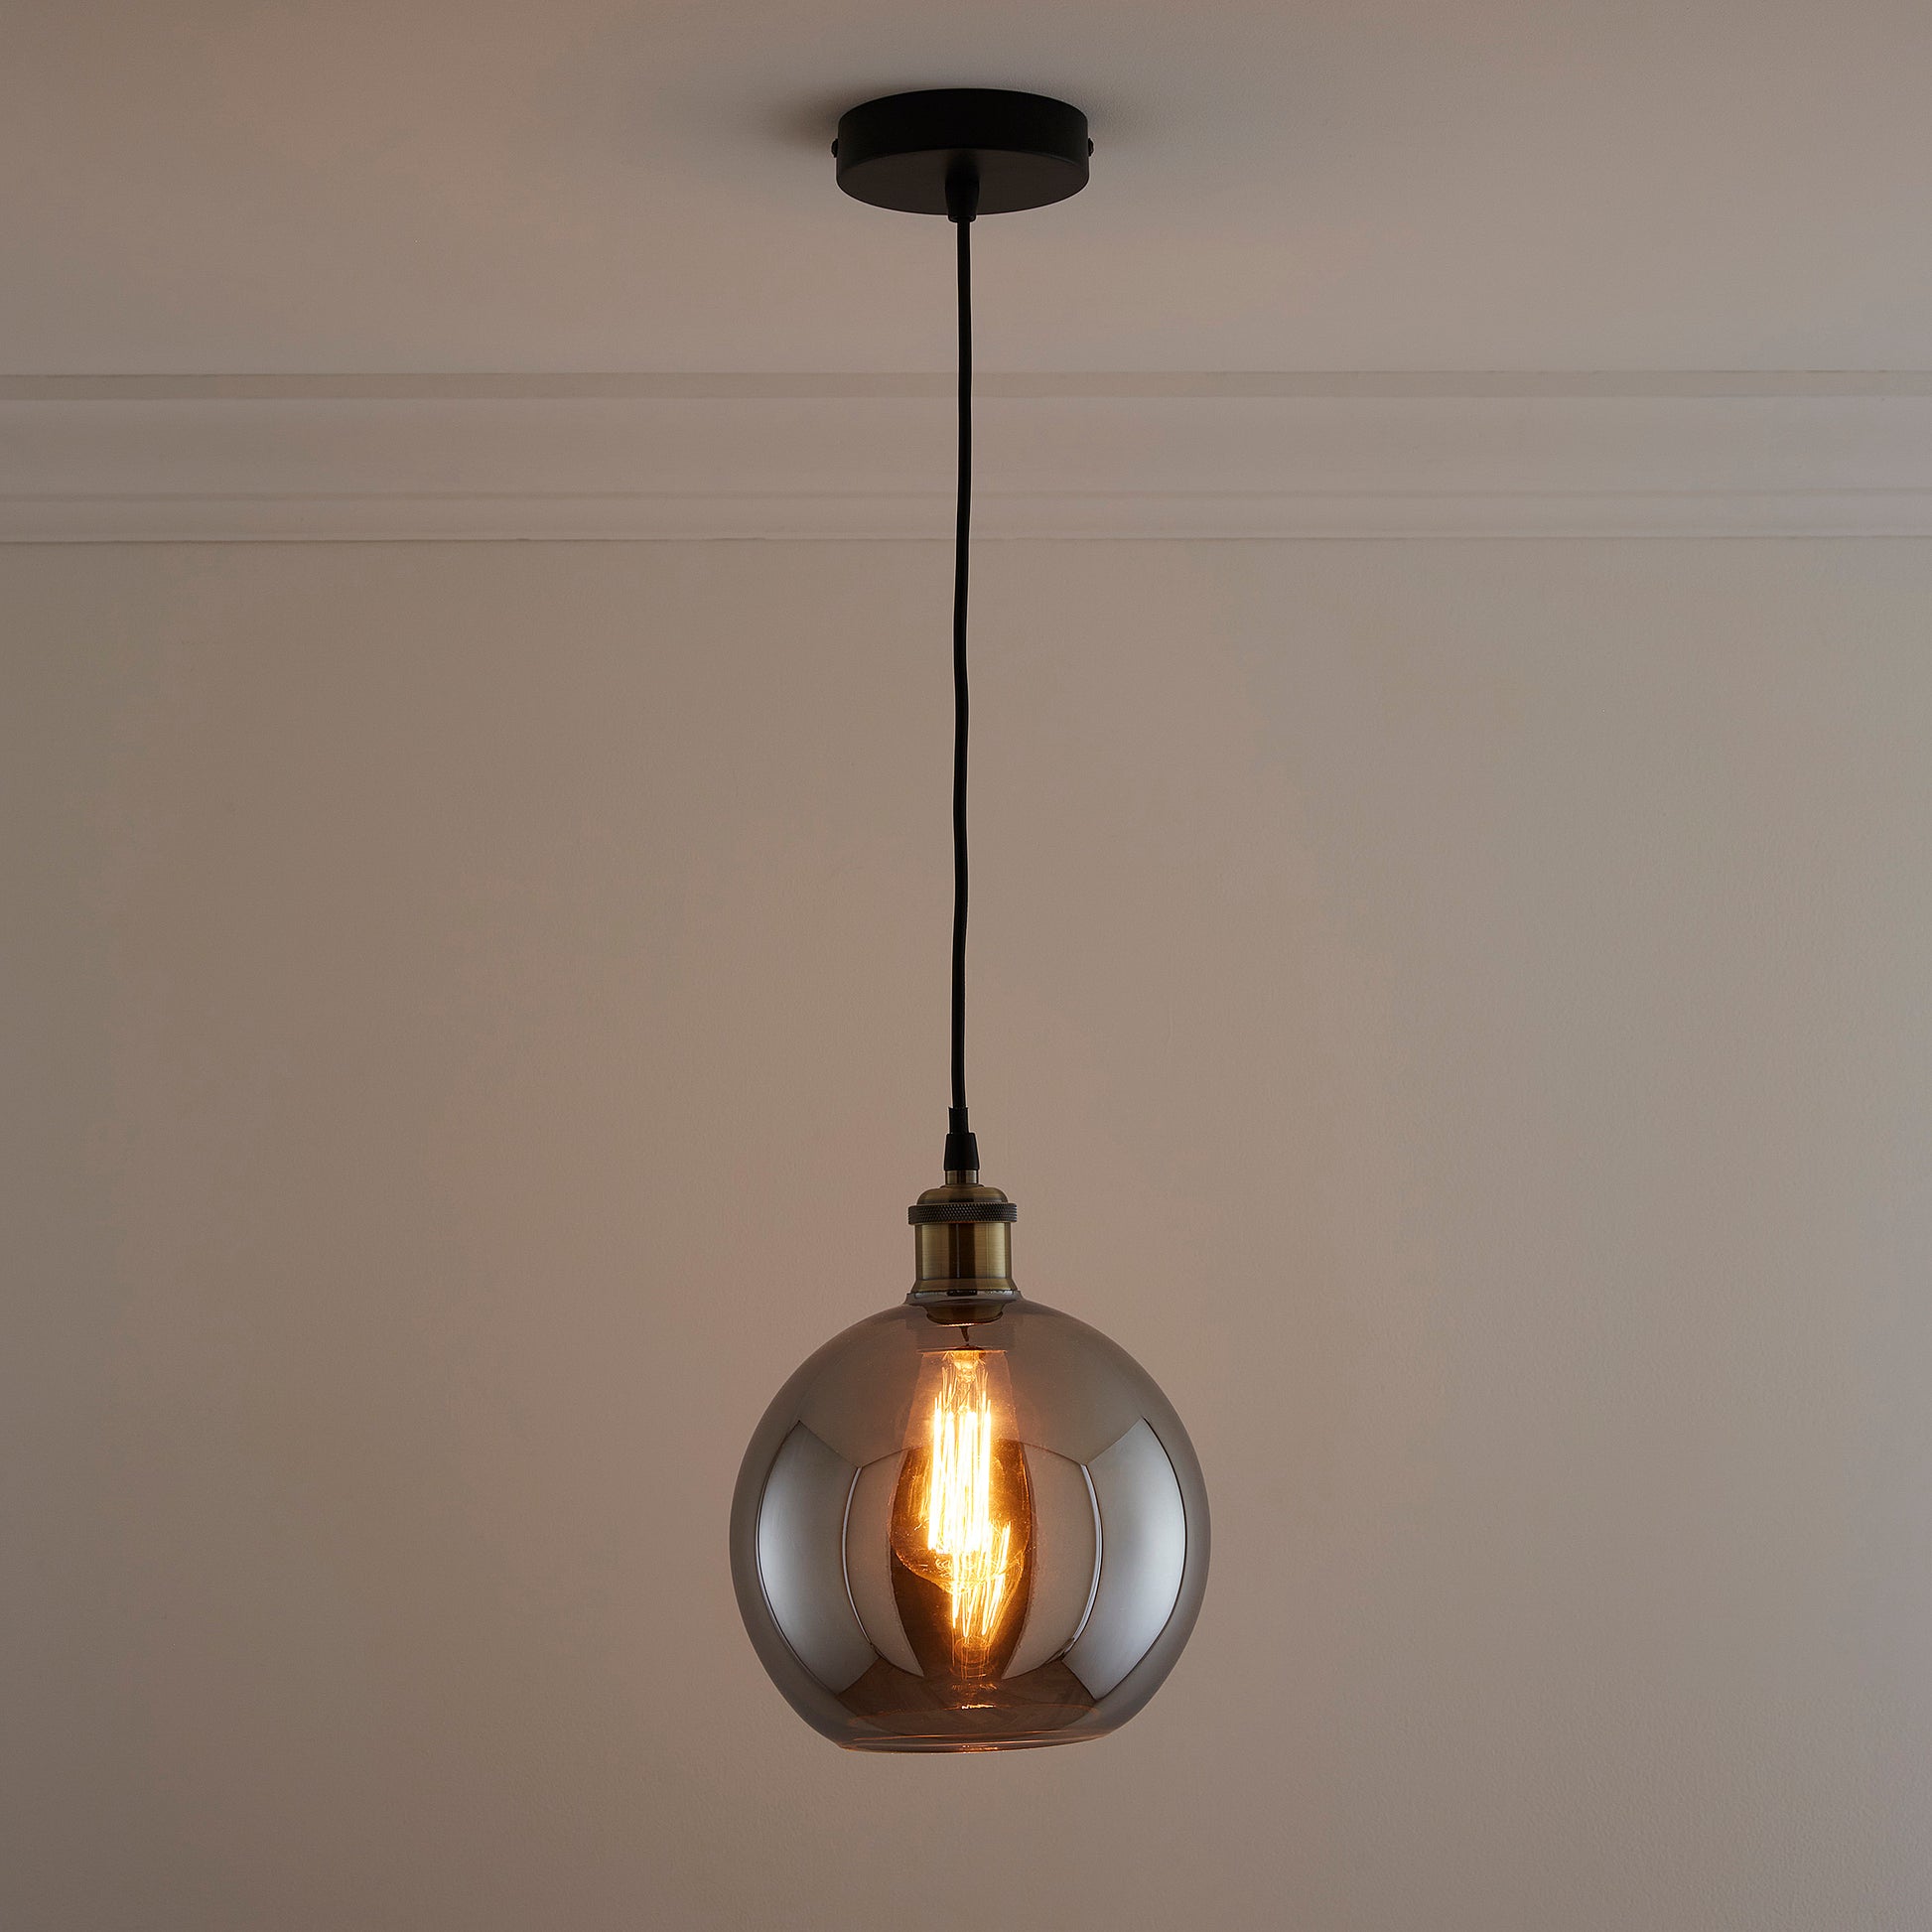 Antonio 1 light Hanging Glass Ceiling Pendant with Filament Bulb 3 Colours Available Amber, Smokey Grey and Clear